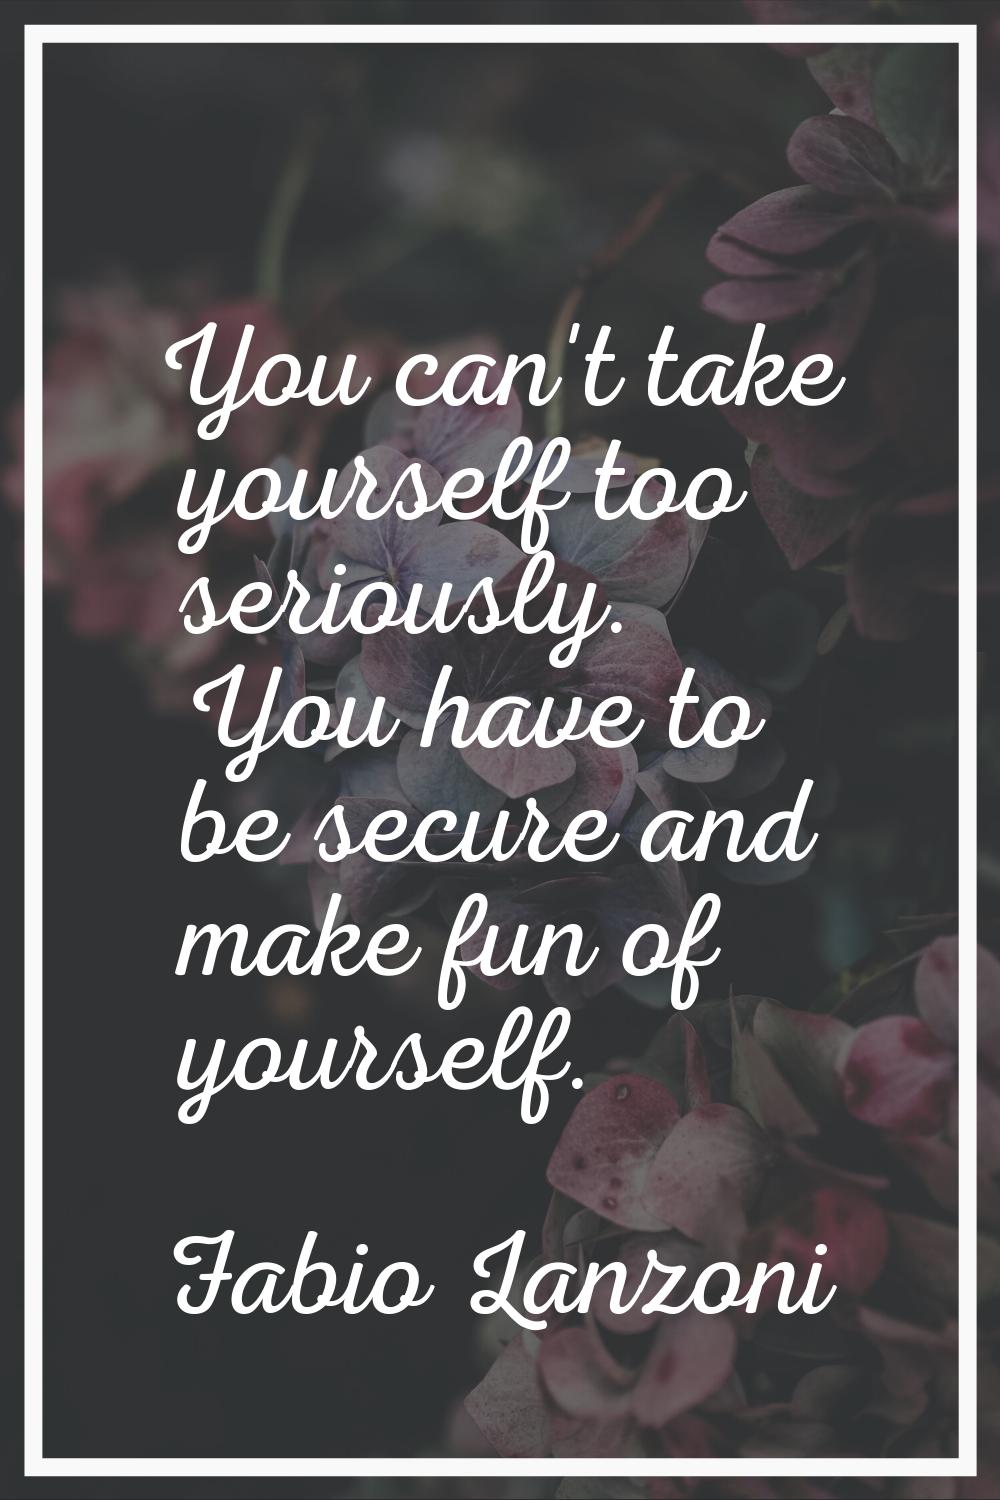 You can't take yourself too seriously. You have to be secure and make fun of yourself.